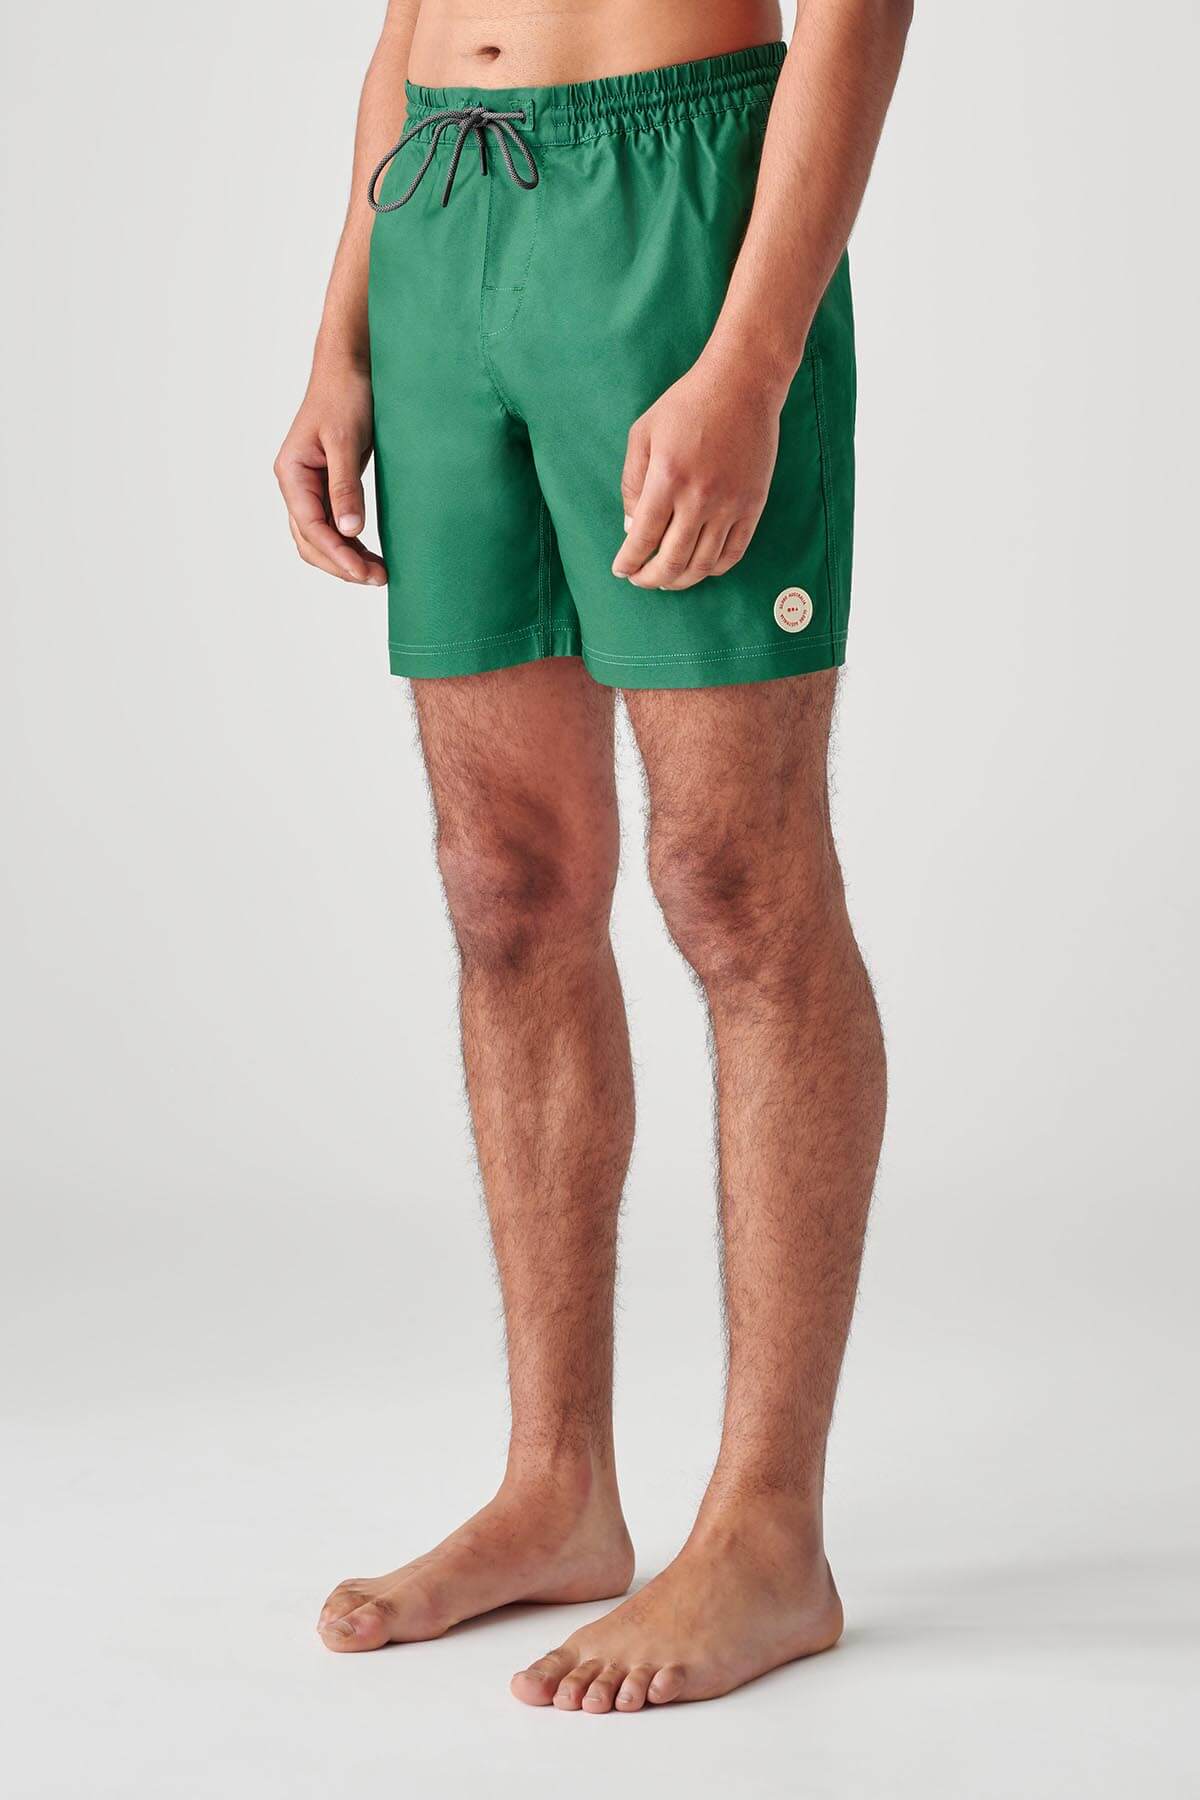 Globe BOARDSHORTS Clean Swell Poolshort - Palm in Palm